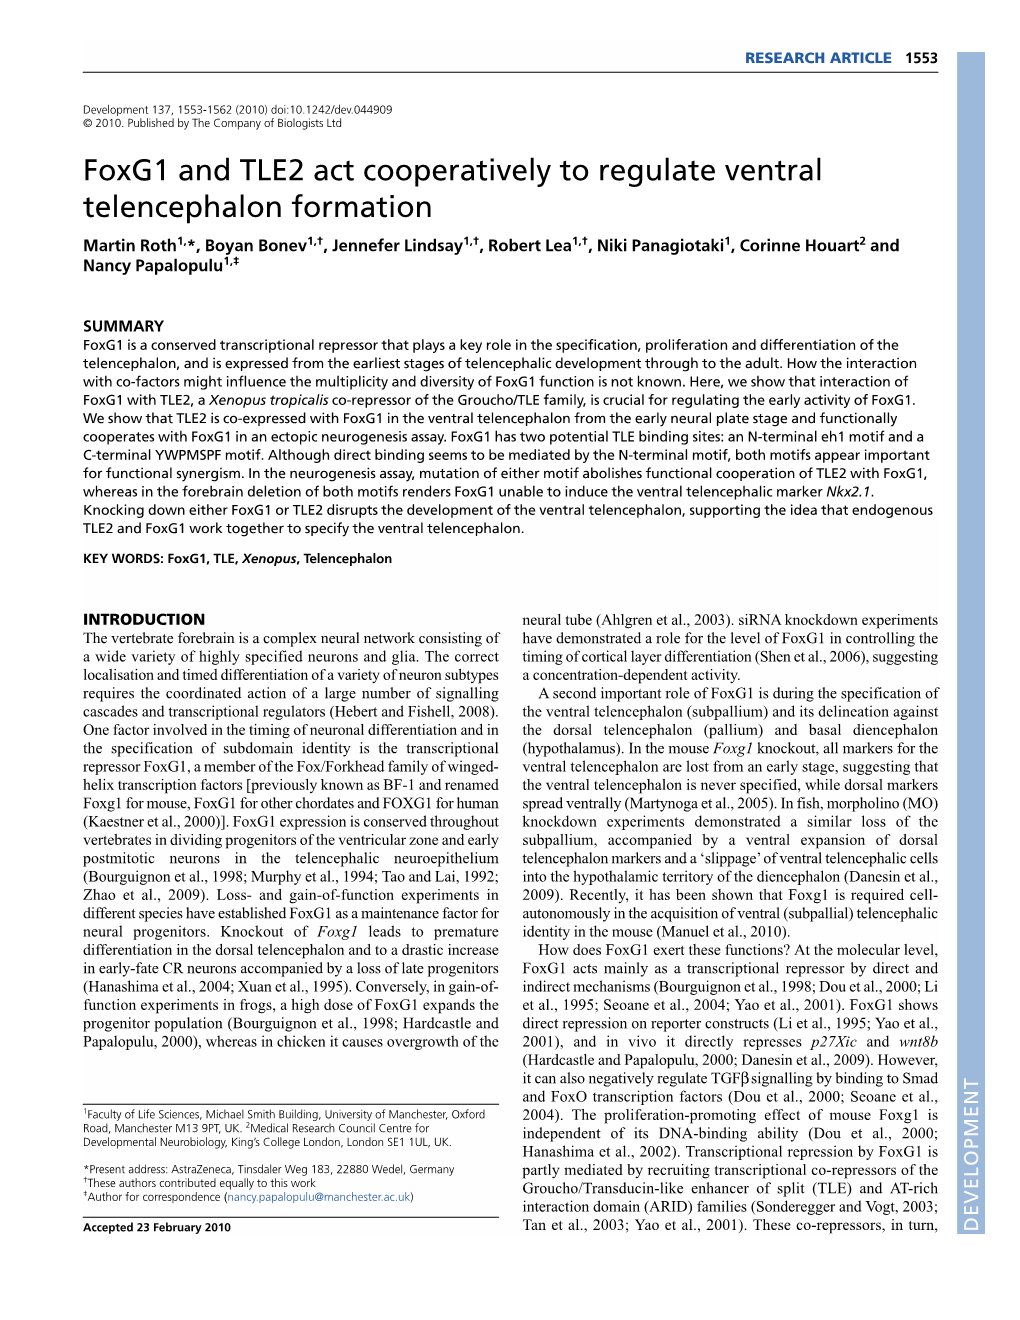 Foxg1 and TLE2 Act Cooperatively to Regulate Ventral Telencephalon